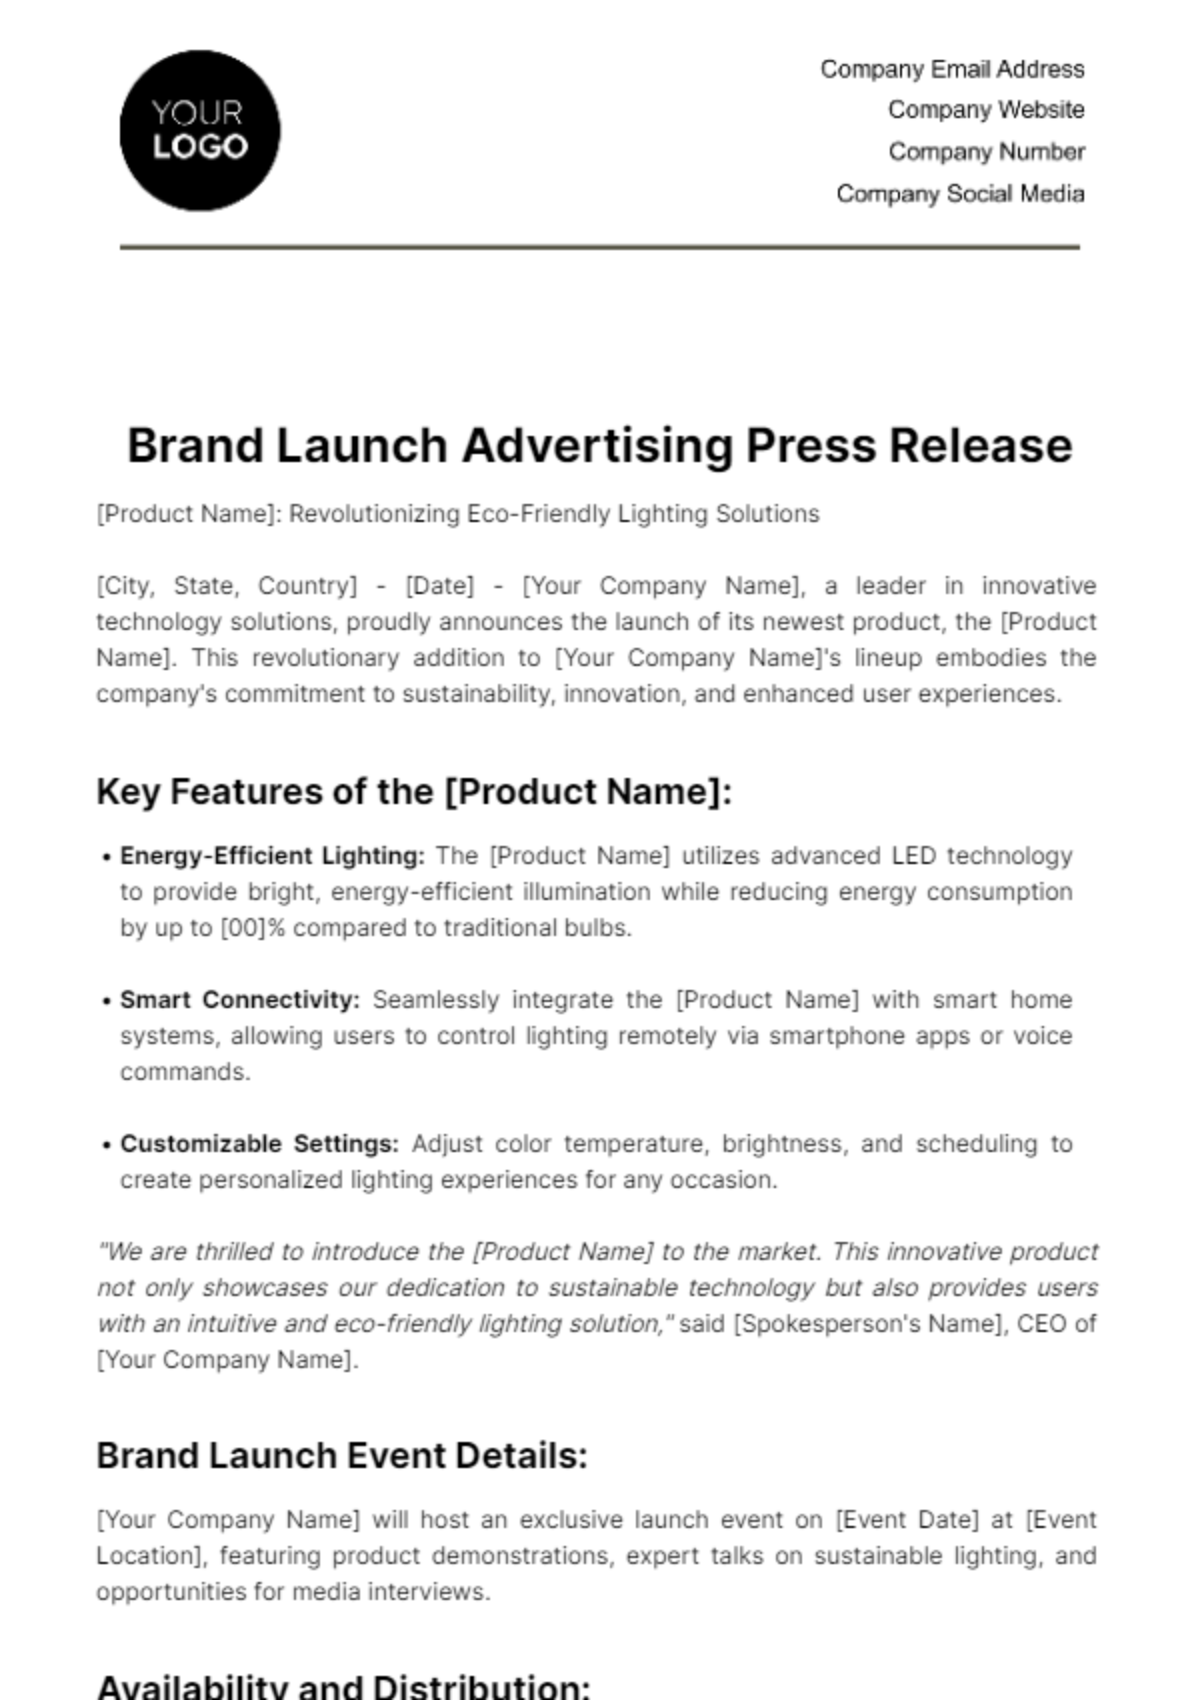 Brand Launch Advertising Press Release Template